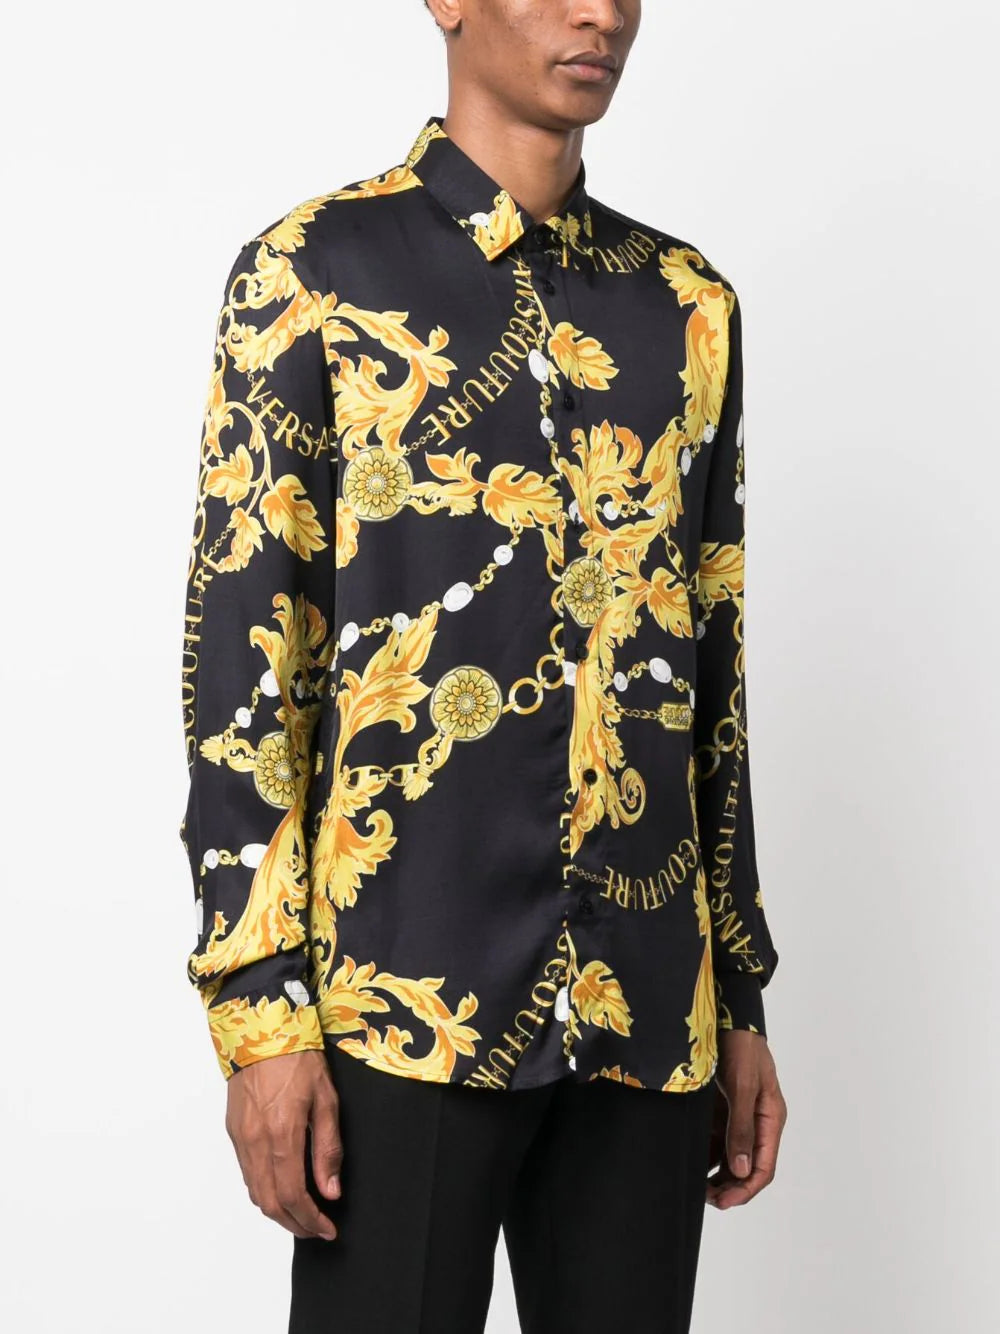 Chain Couture long-sleeve shirt